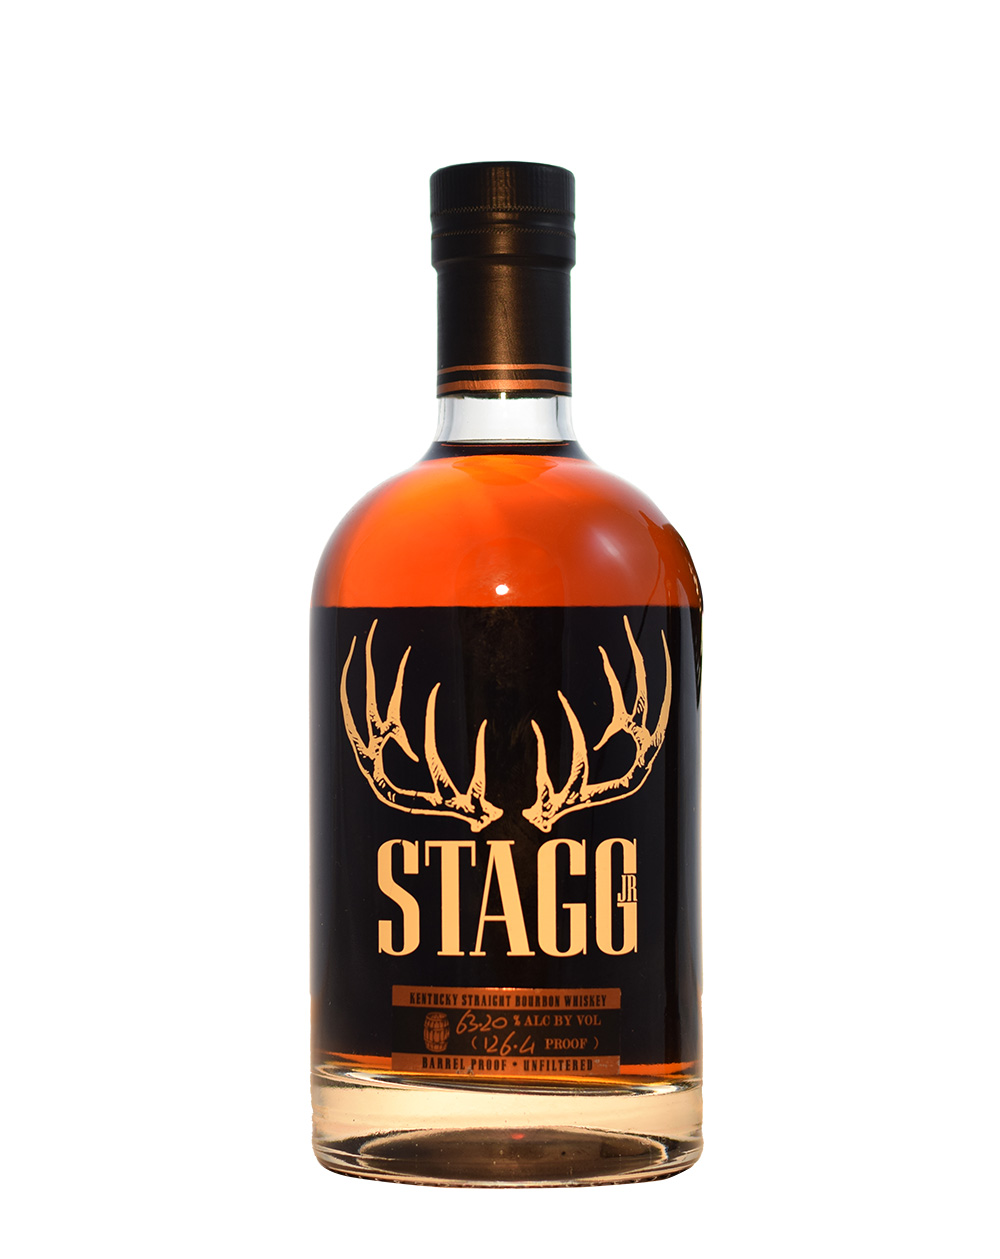 Stagg Jr. Kentucky Straight 2018 Musthave Malts MHM